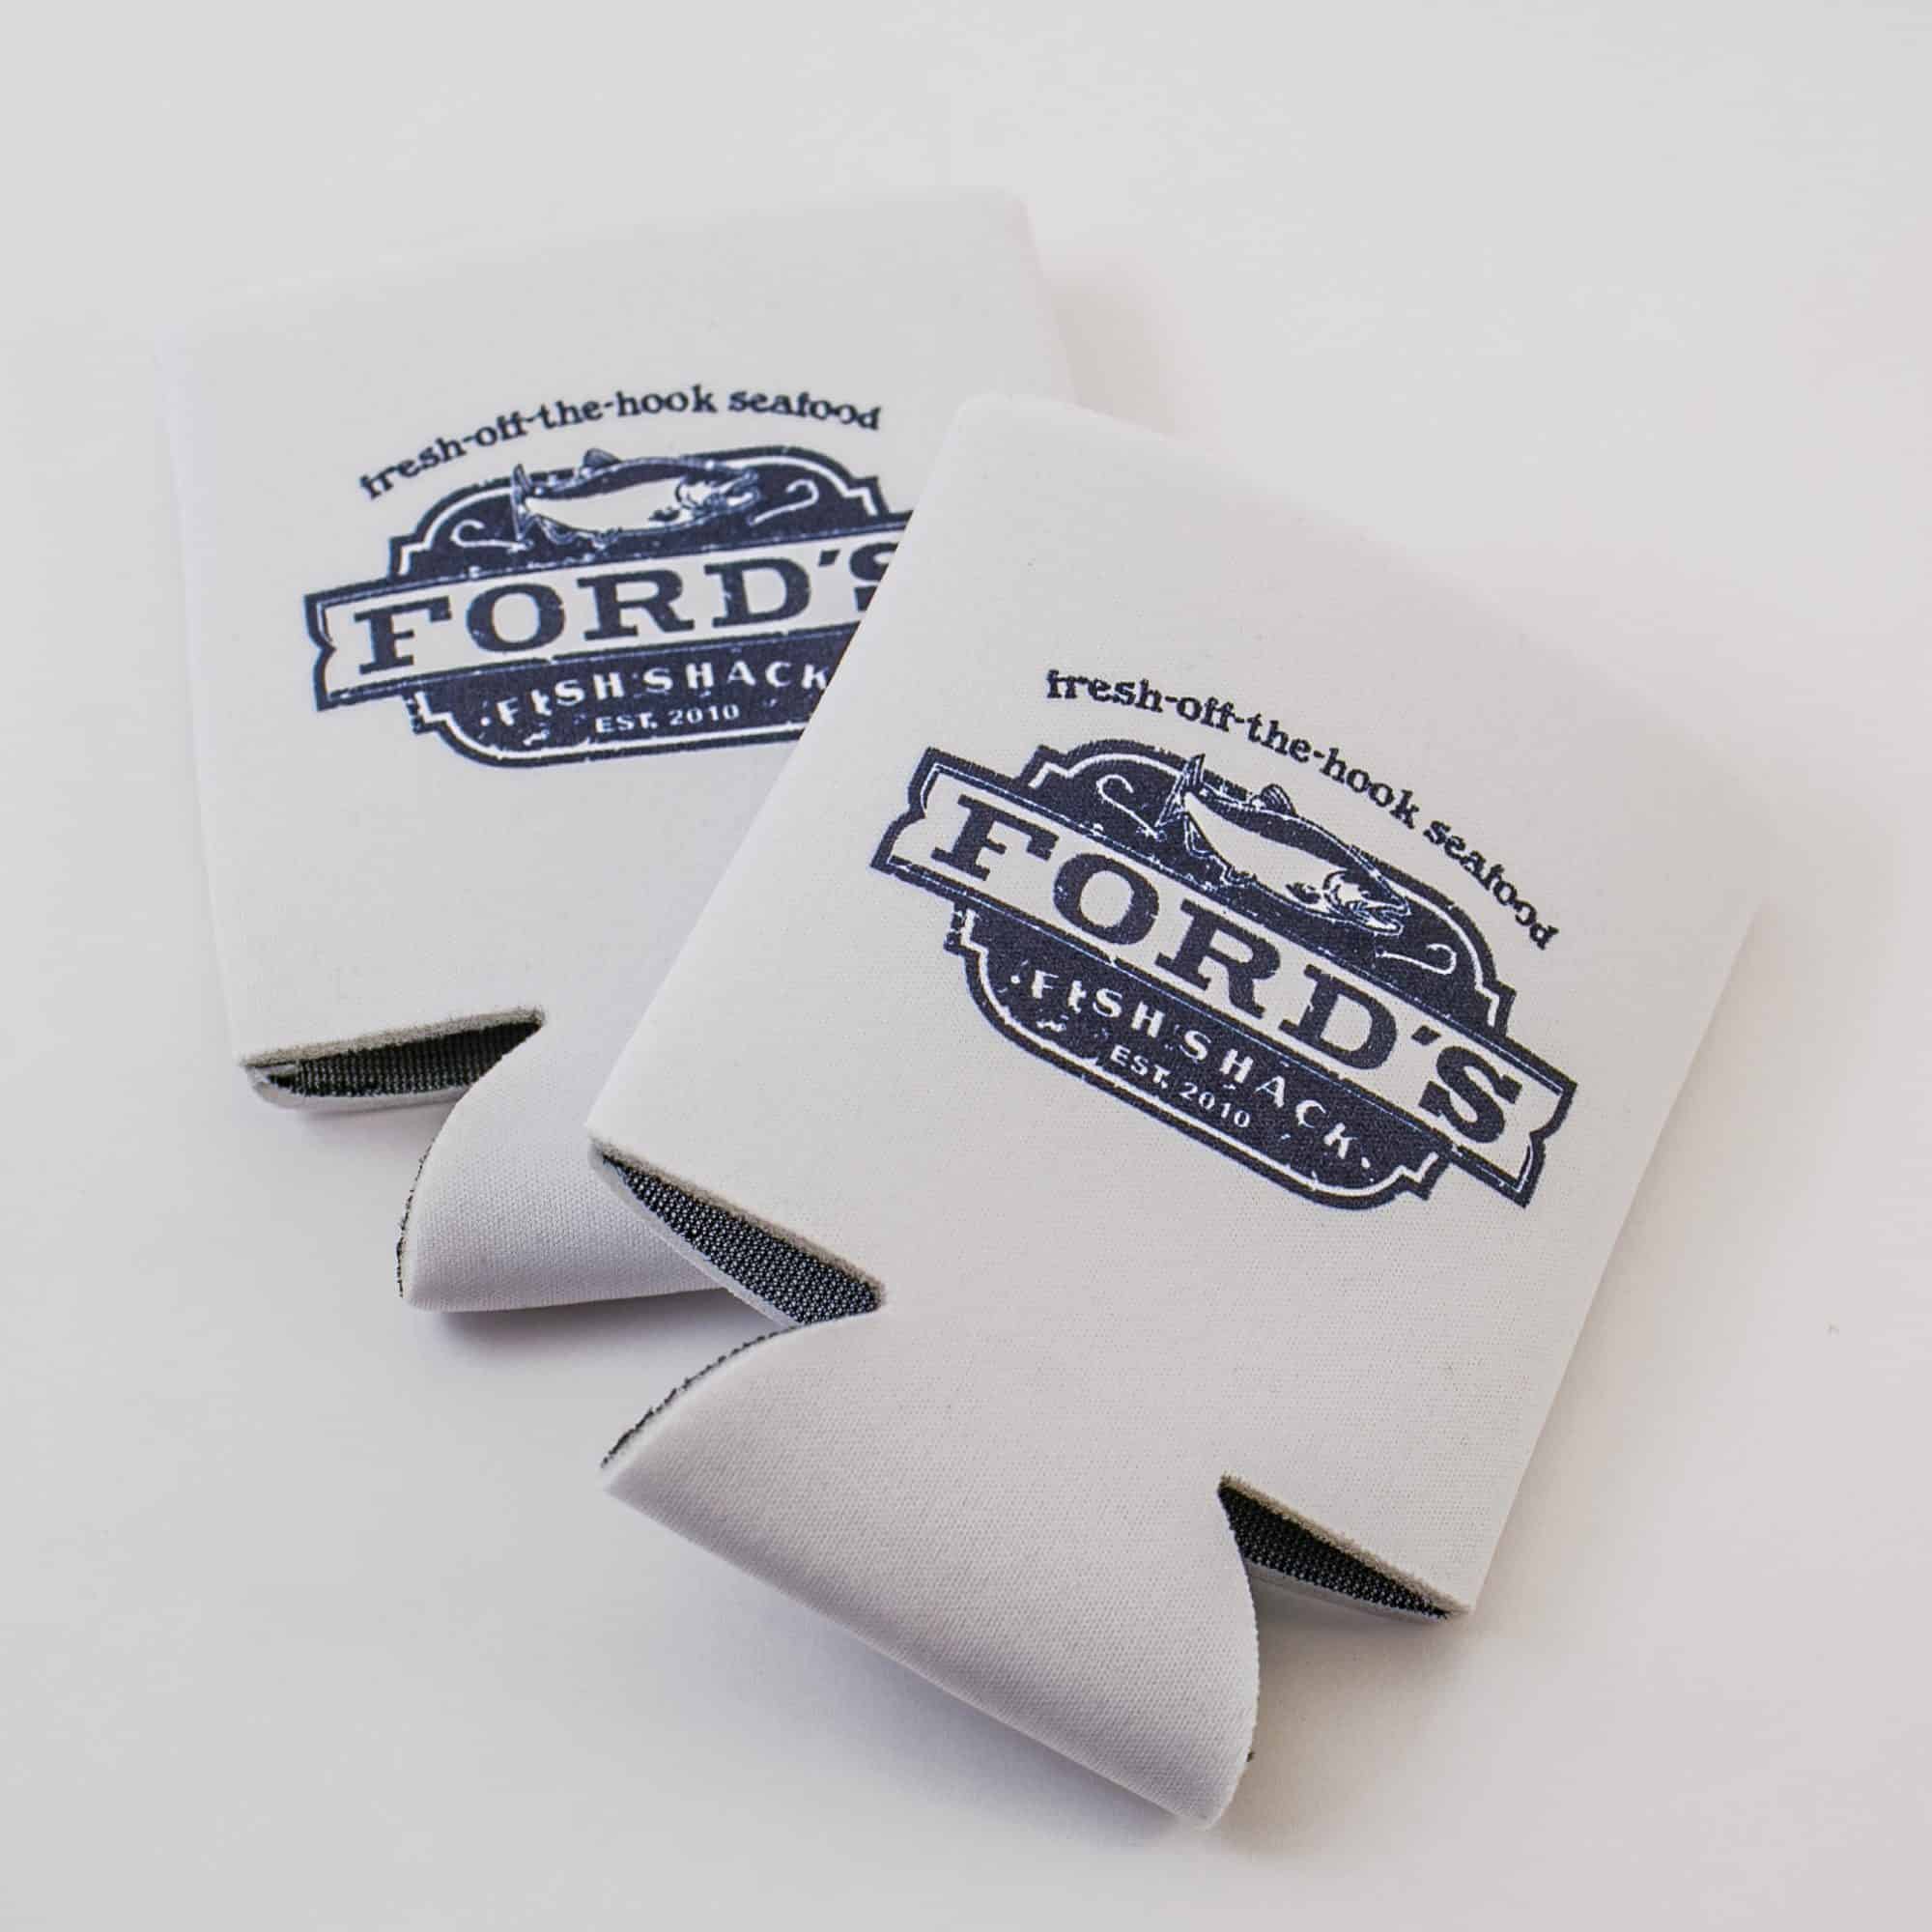 KOOZIE® Collapsible Can Cooler